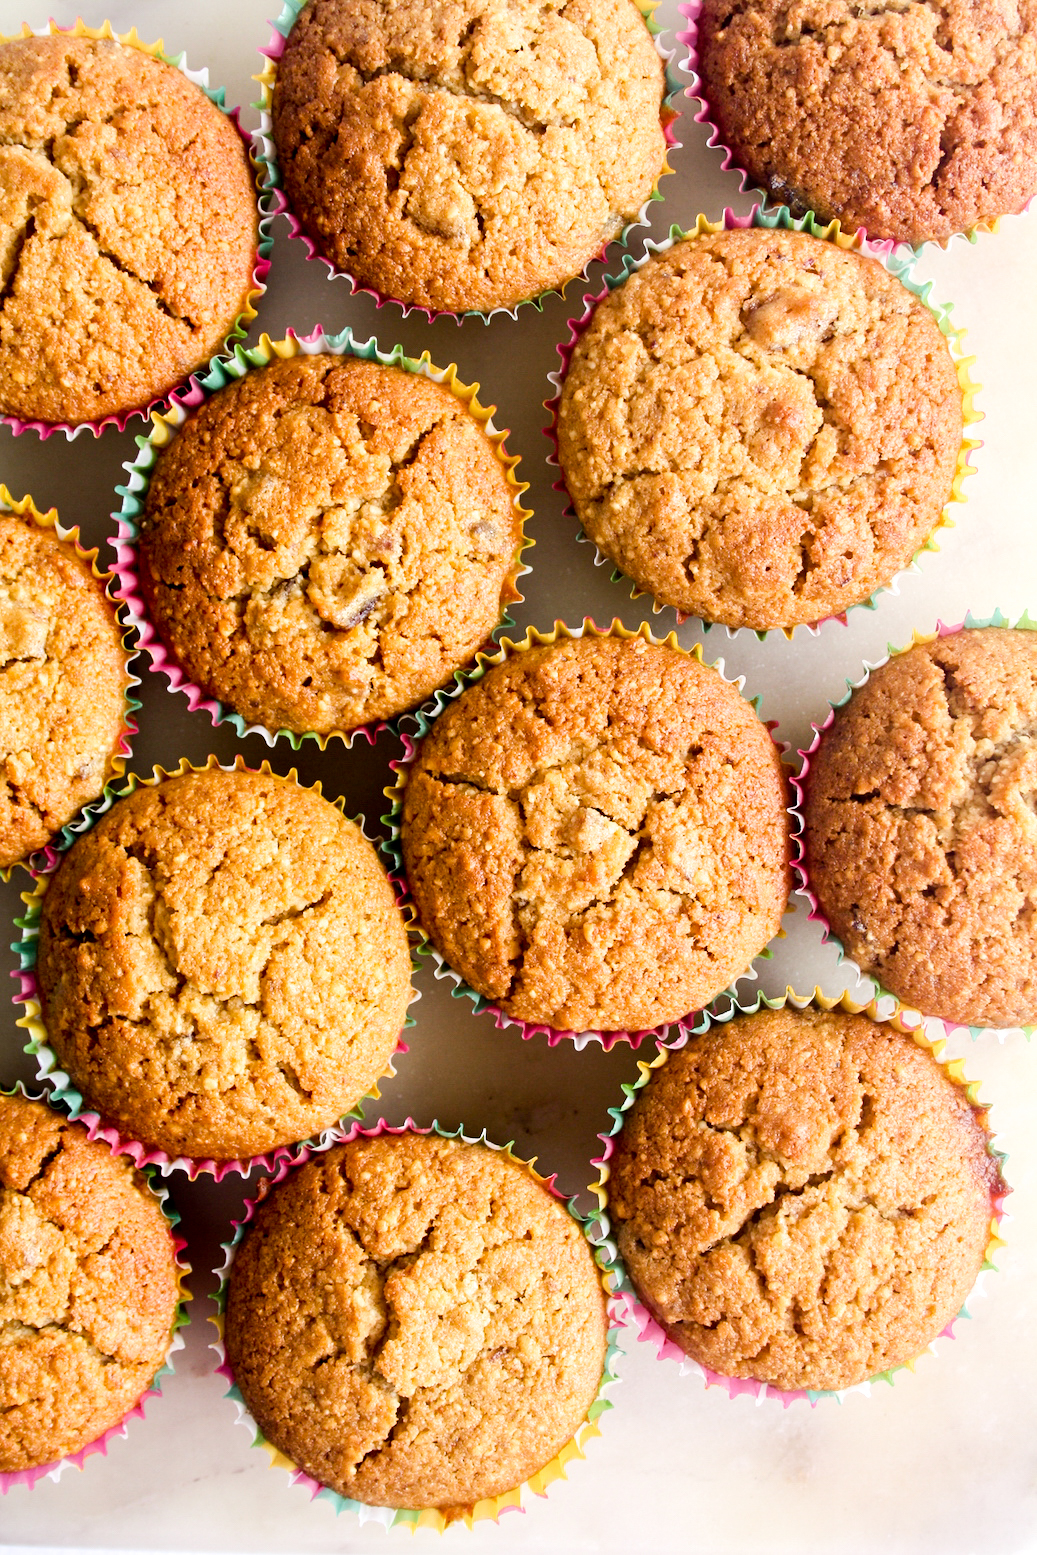 Moist, naturally sweetened muffins with almonds and wholewheat flour